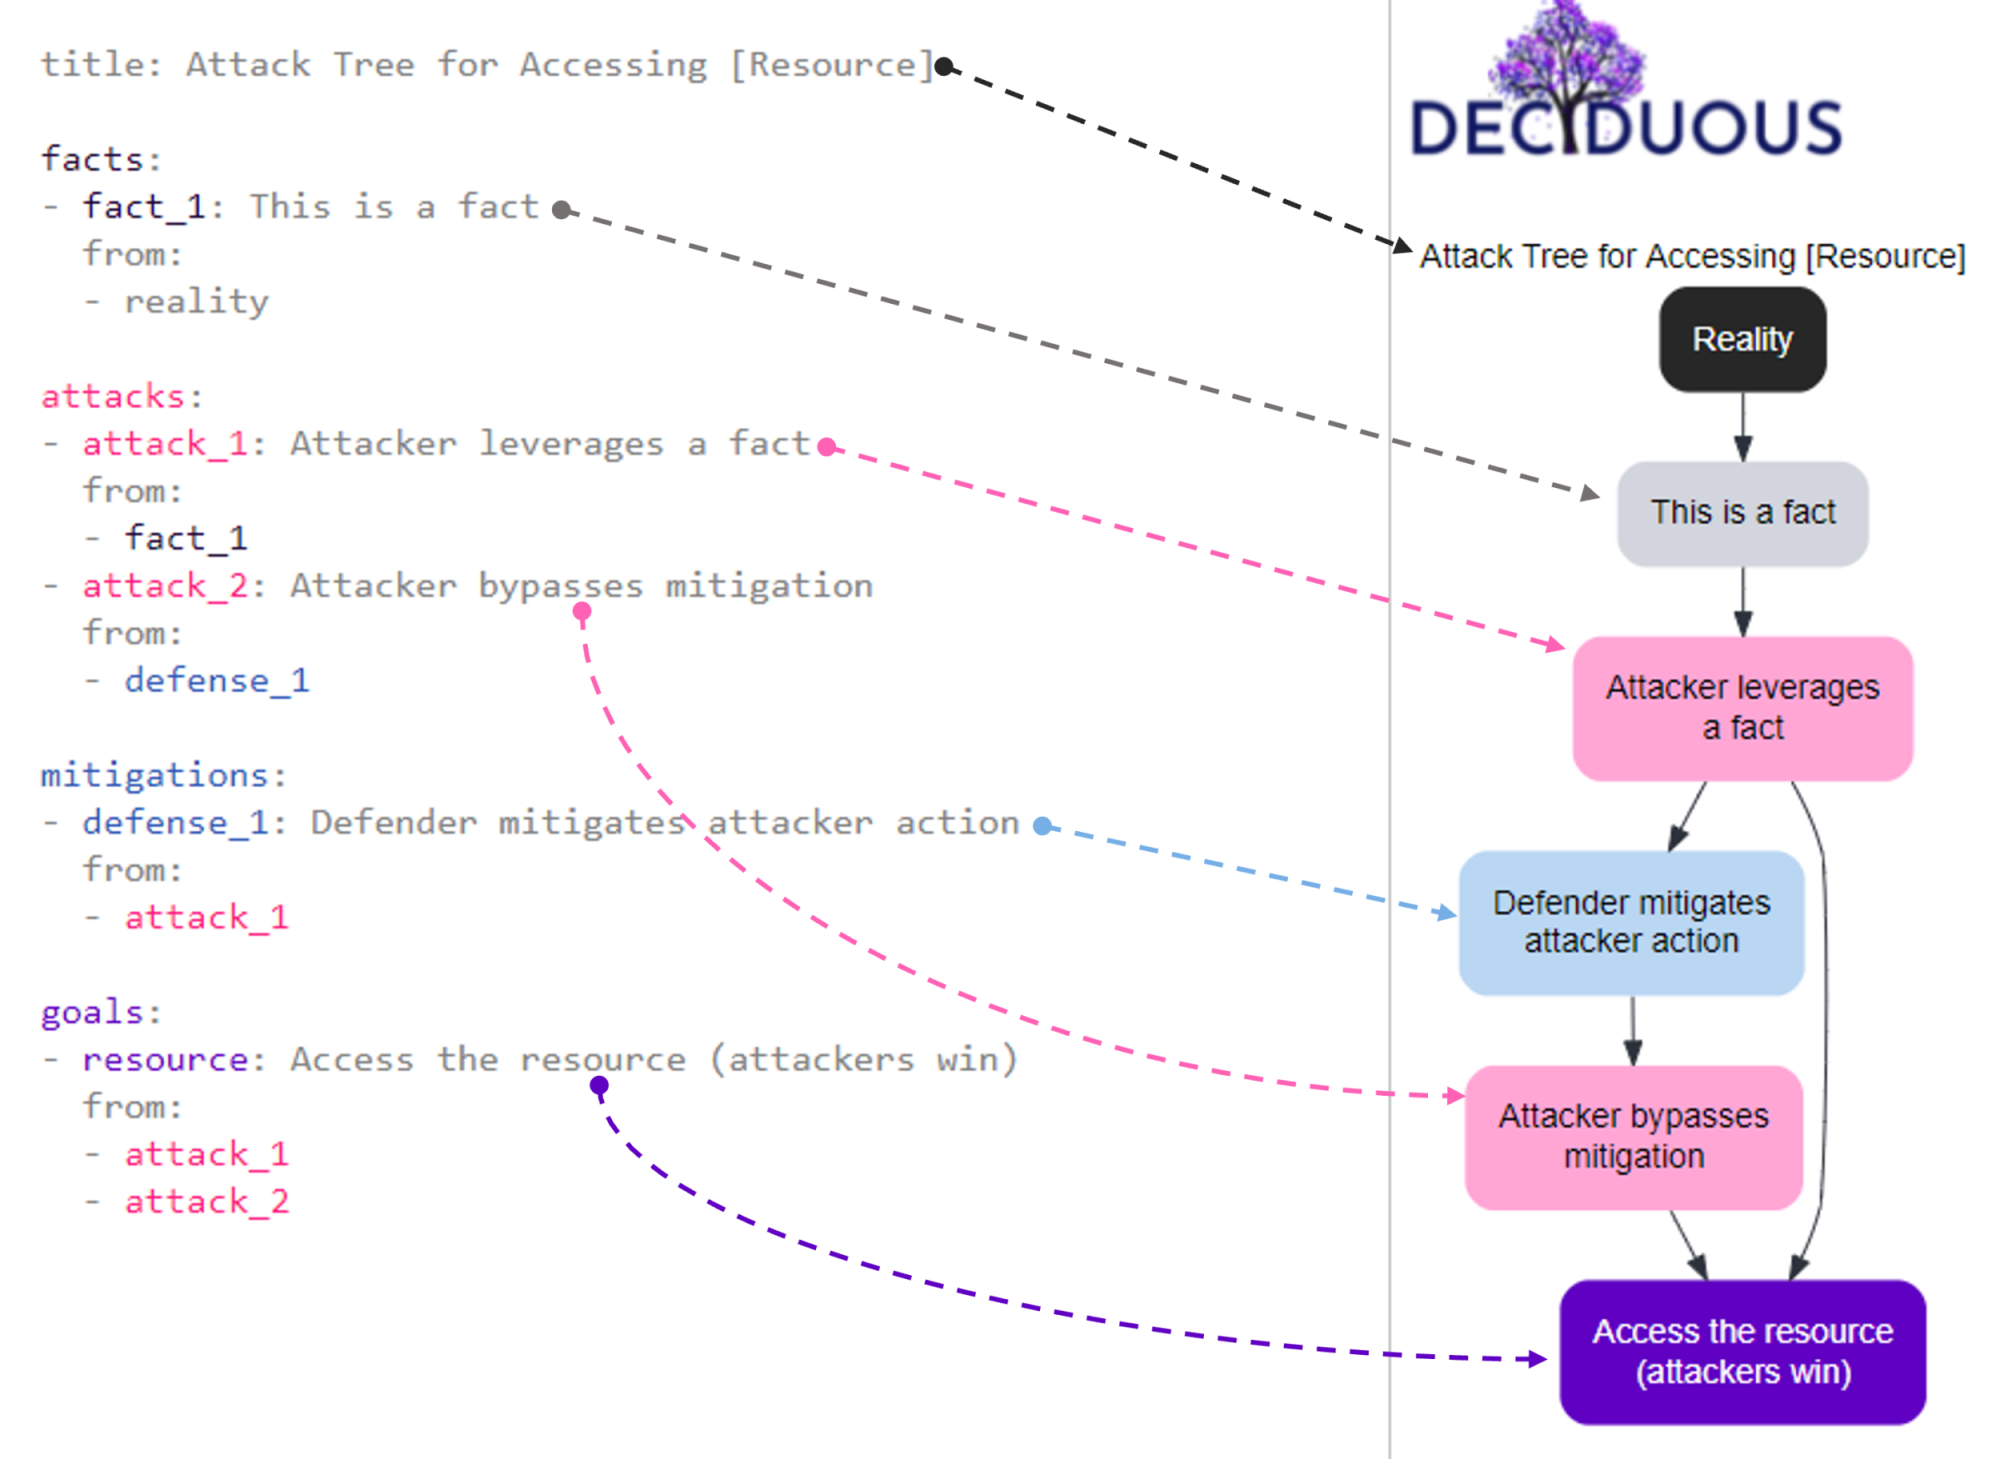 A basic attack tree showing the components that can be edited in Deciduous